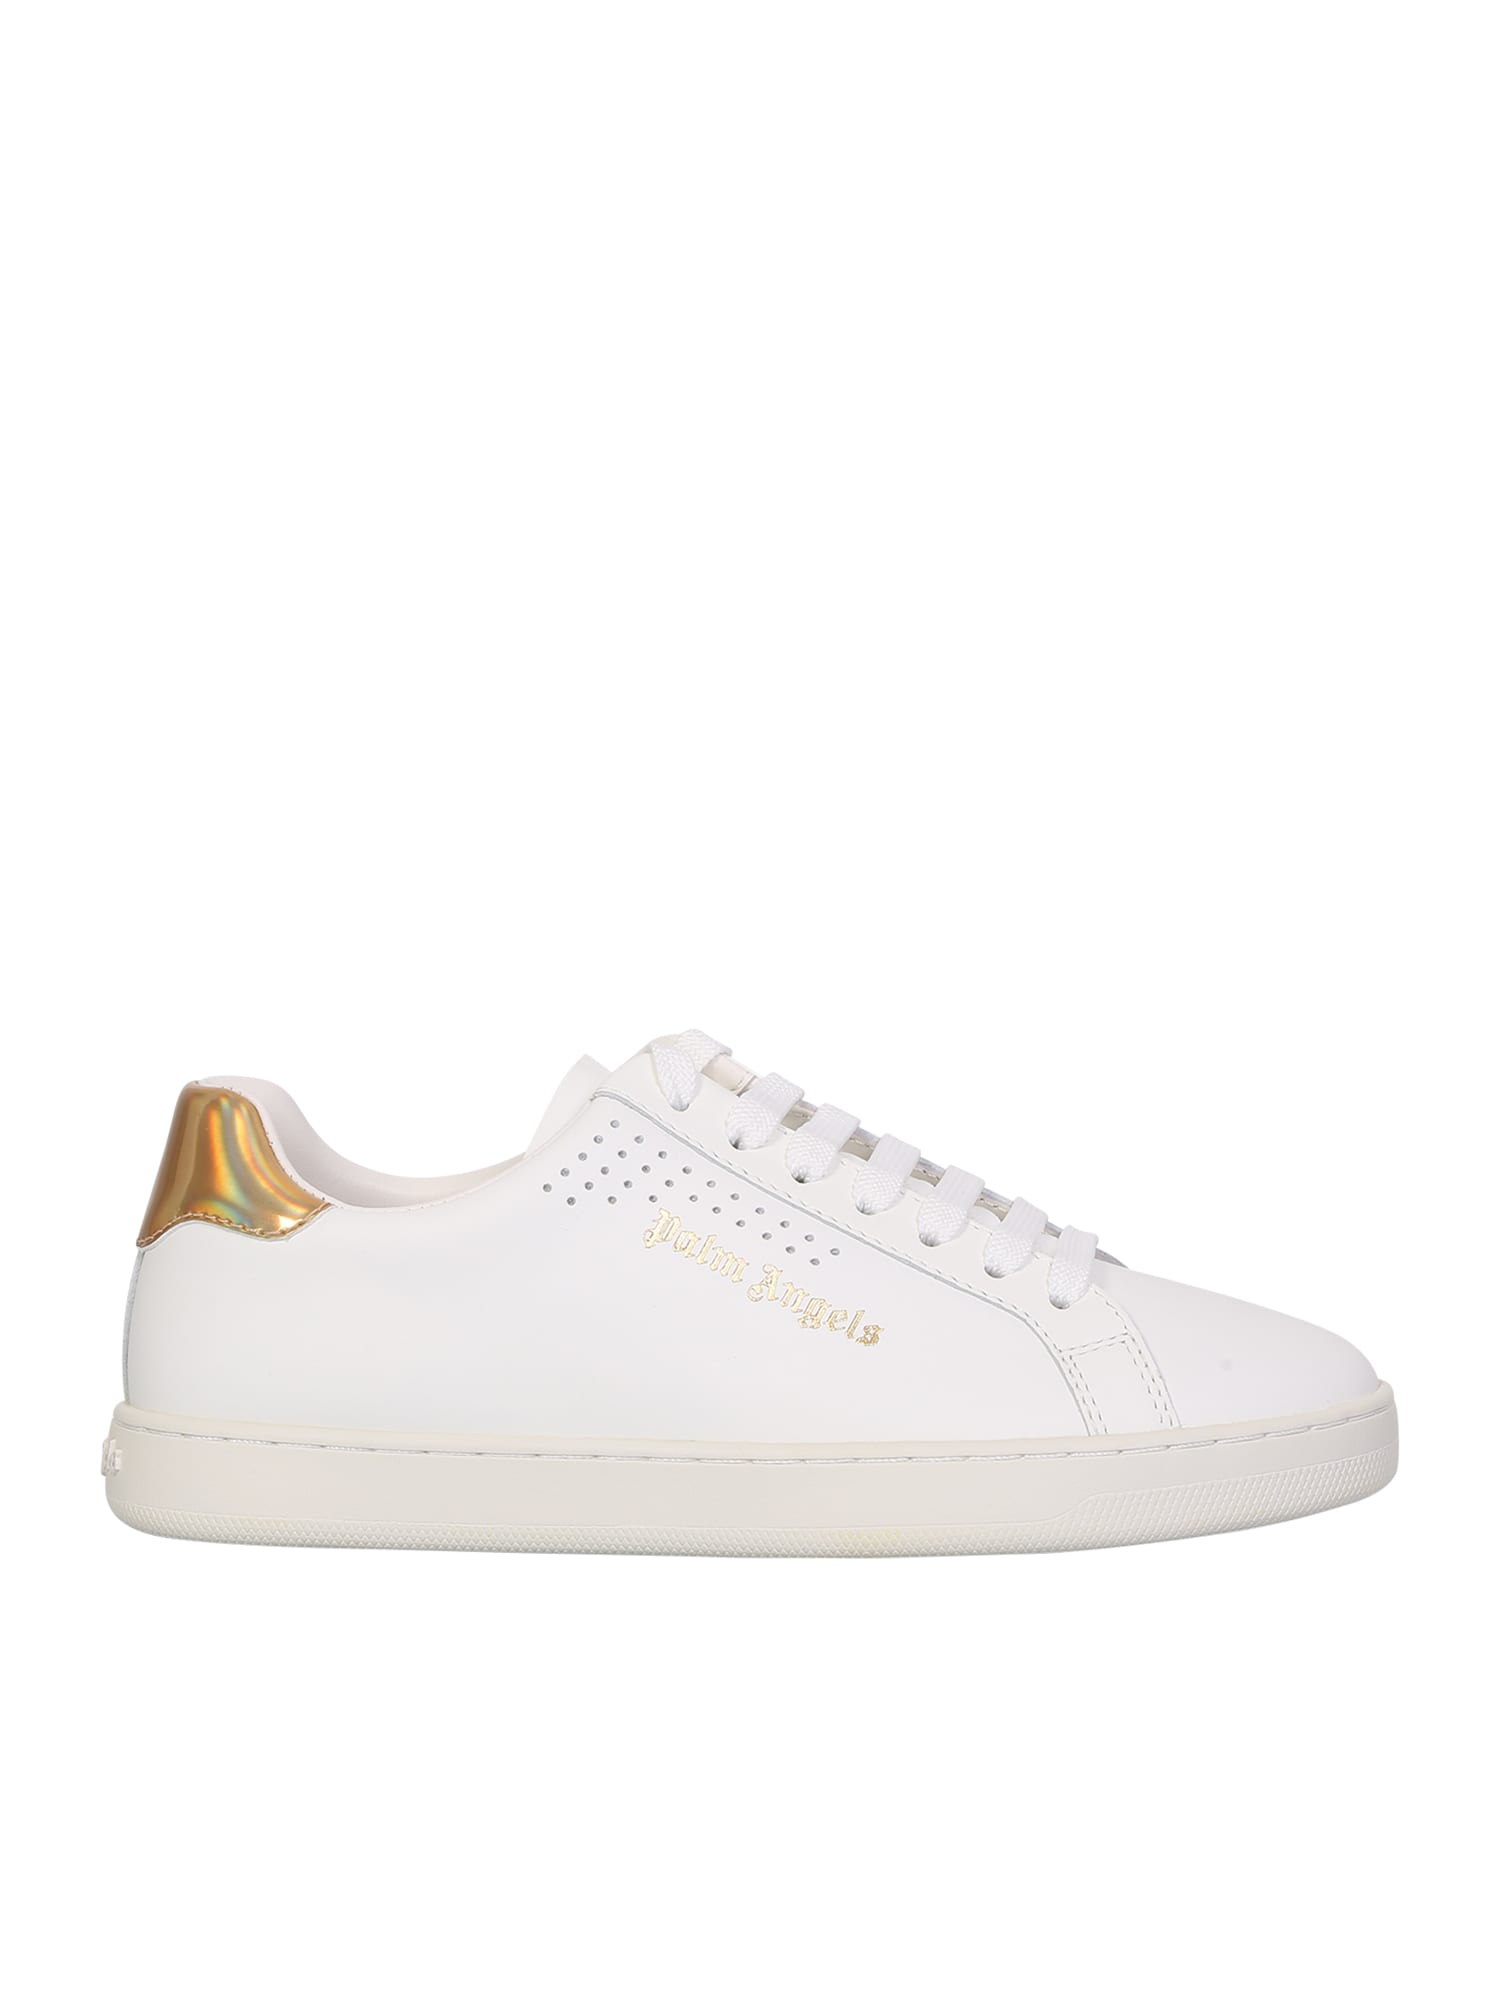 Palm Angels Palm One Sneakers White/gold